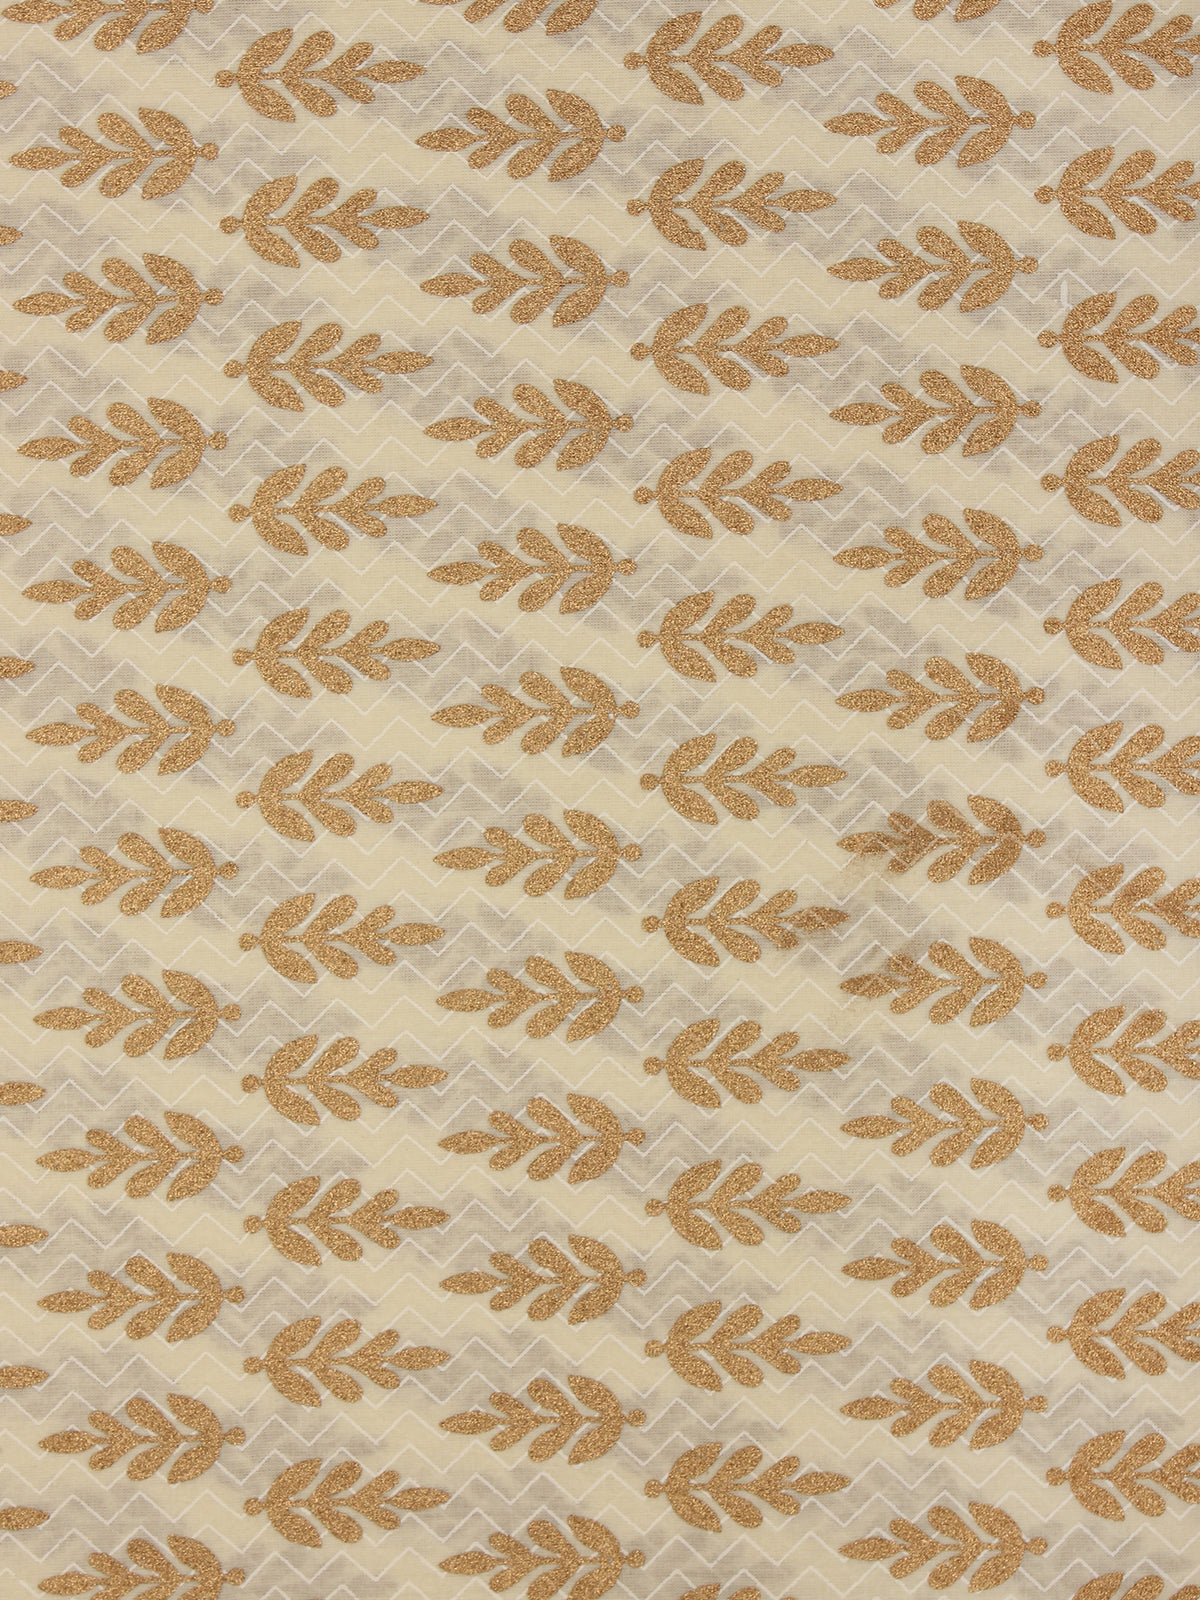 Ivory Gold Hand Block Printed Cotton Fabric Per Meter - F001F2026